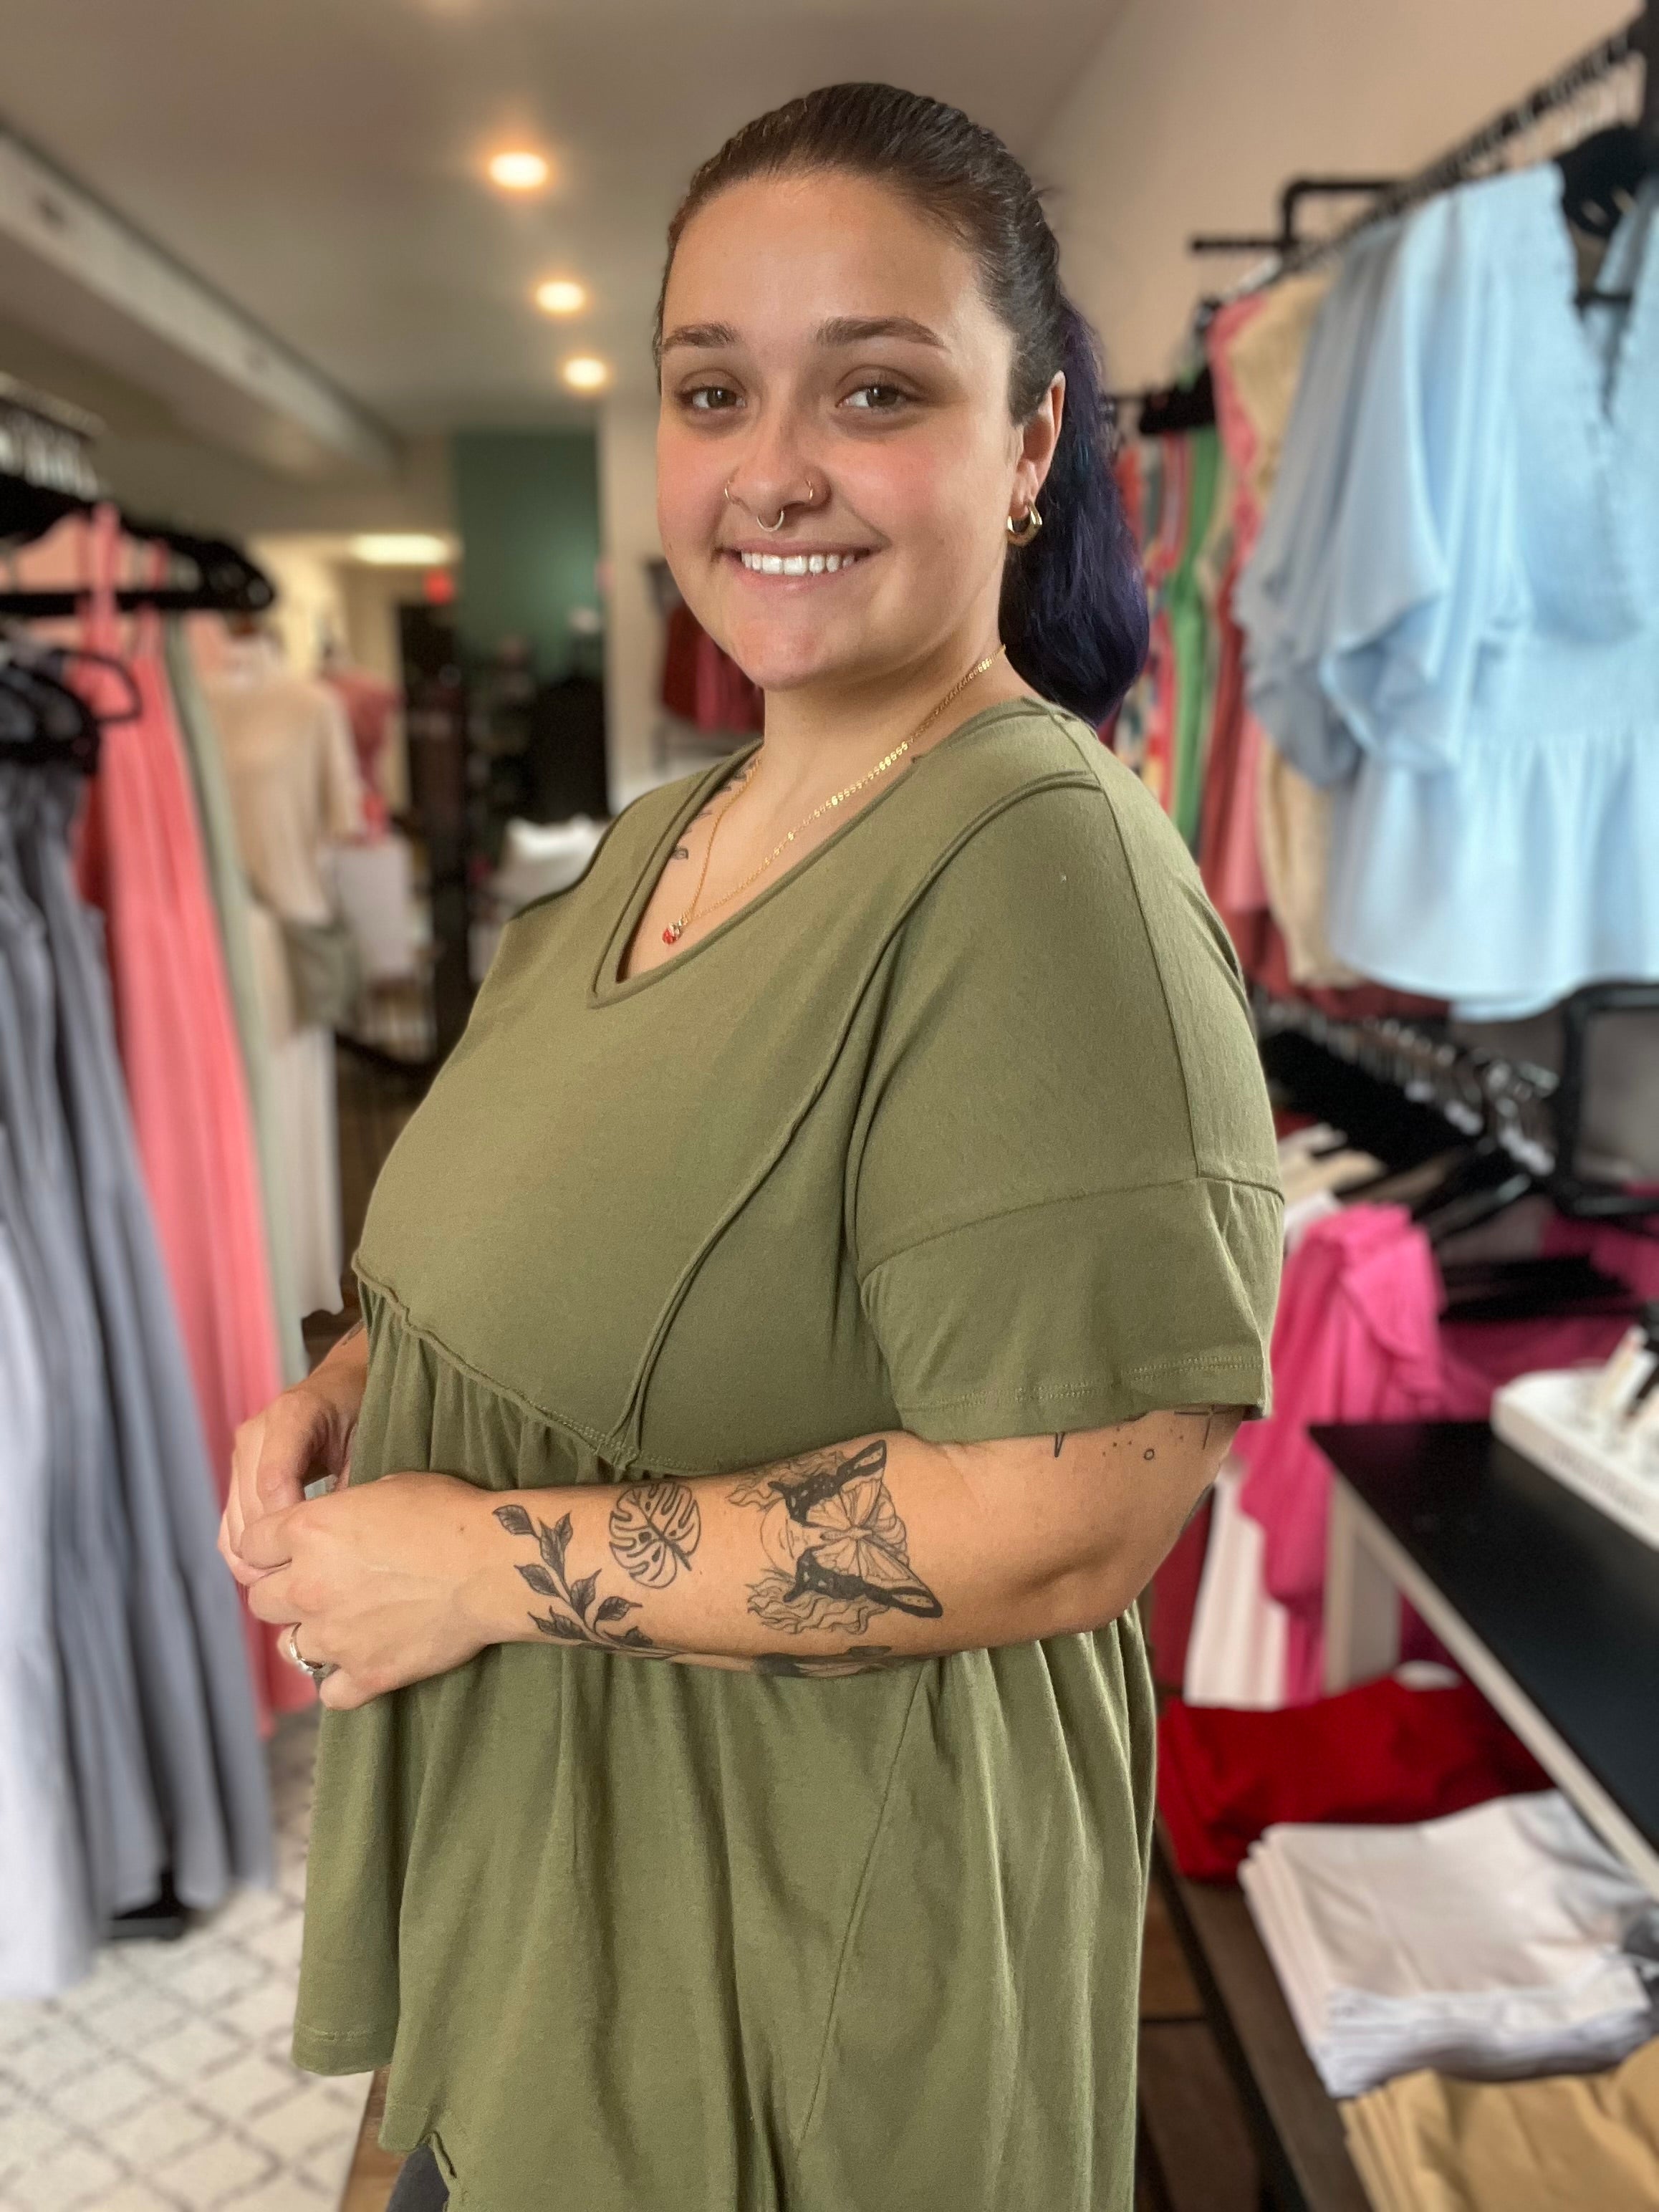 Shop Shelbi Babydoll Top-Shirts & Tops at Ruby Joy Boutique, a Women's Clothing Store in Pickerington, Ohio